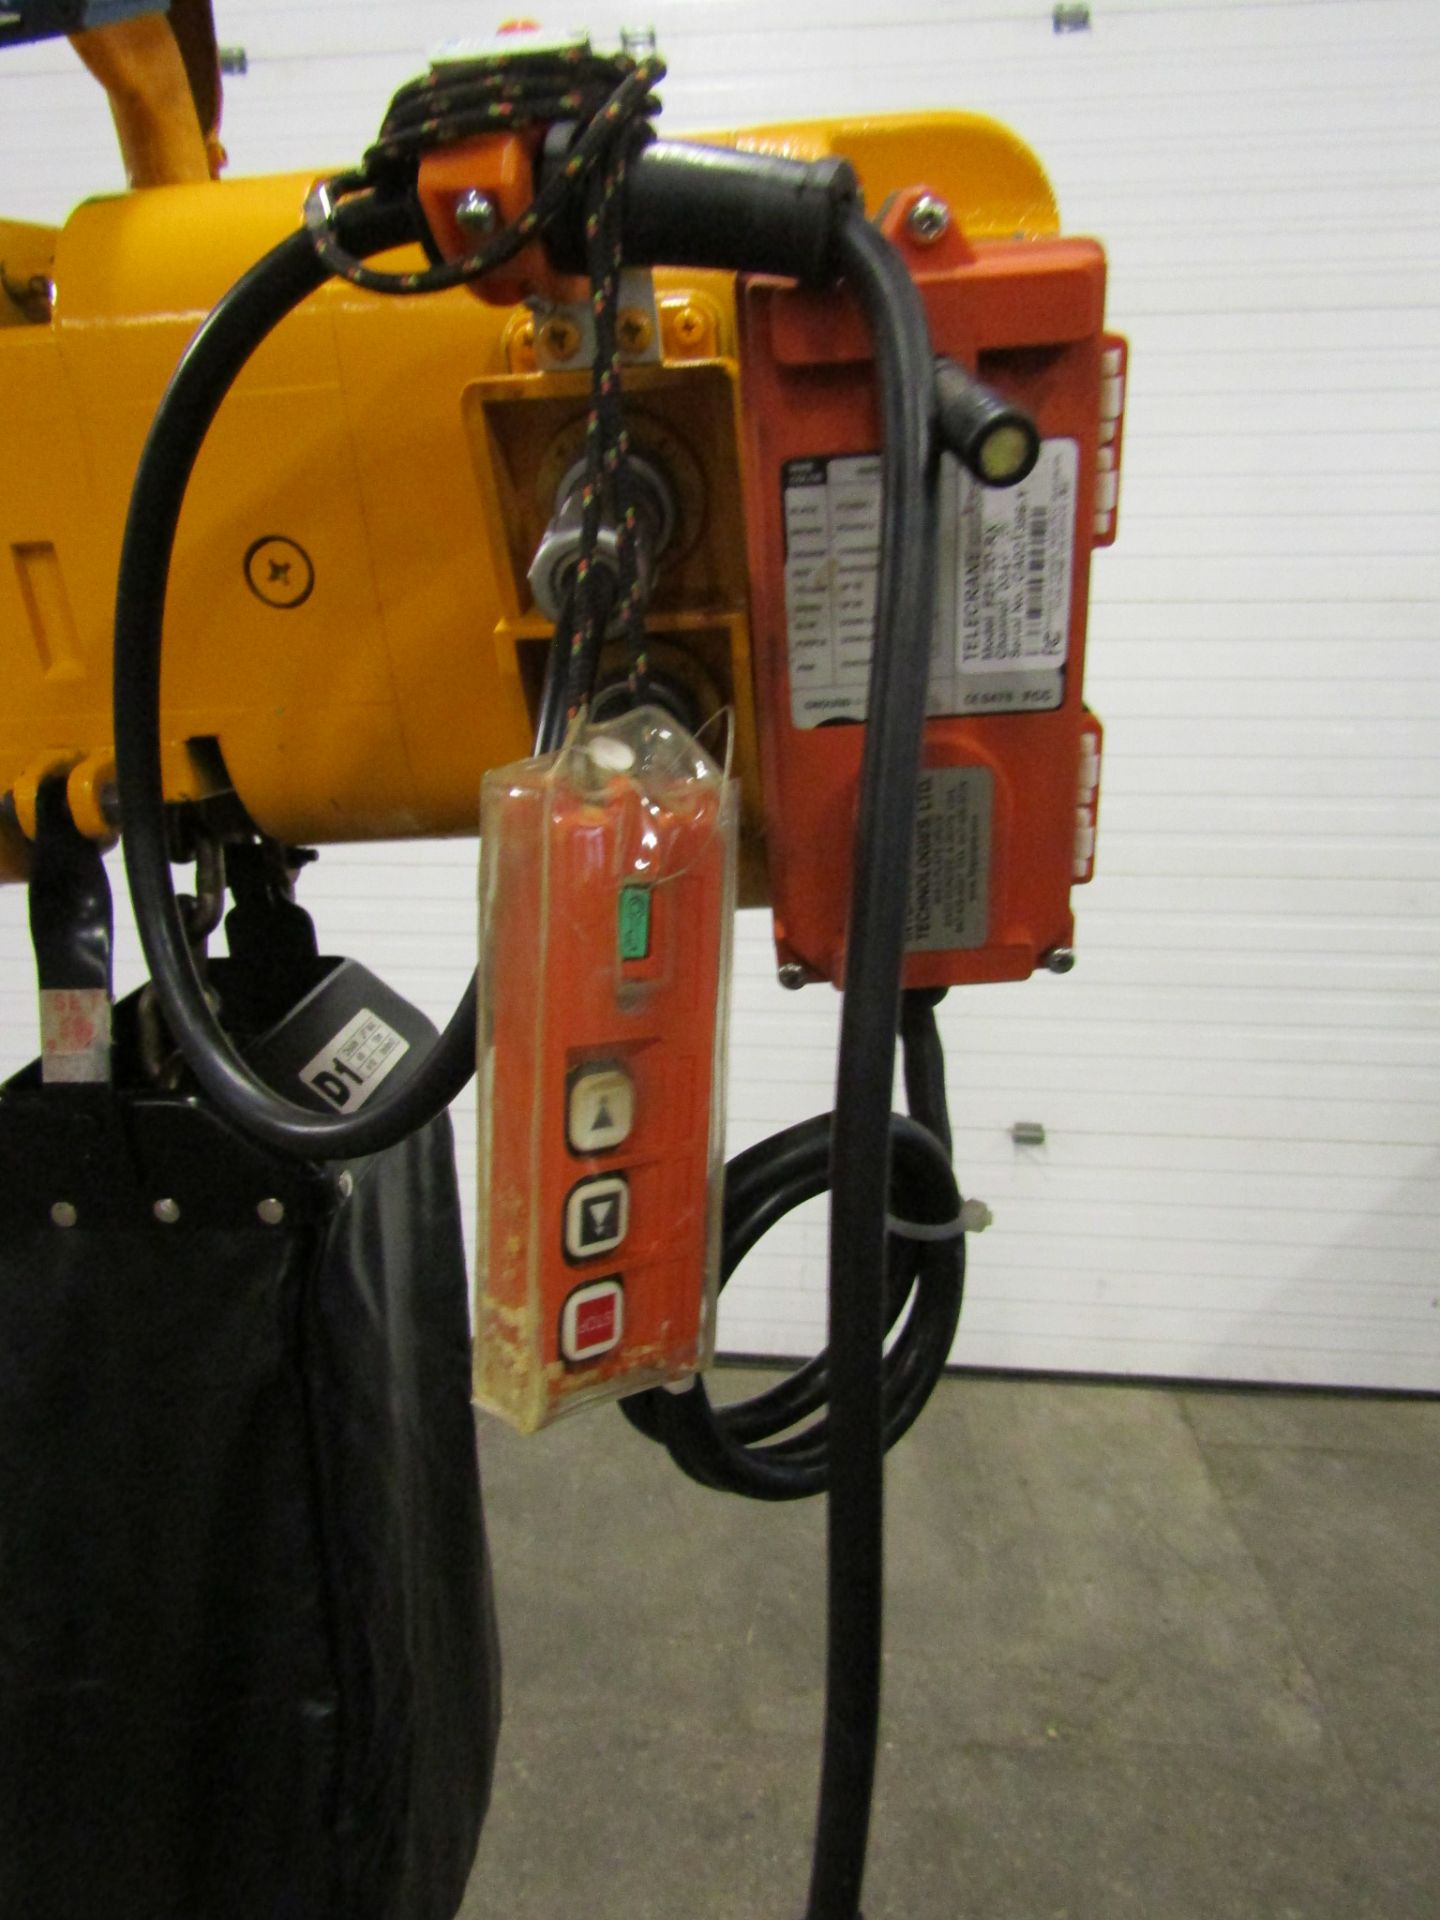 Harrington 2 Ton Electric Chain Hoist model 4H - 2000kg / 4000lbs lift capacity with trolley - Image 3 of 3